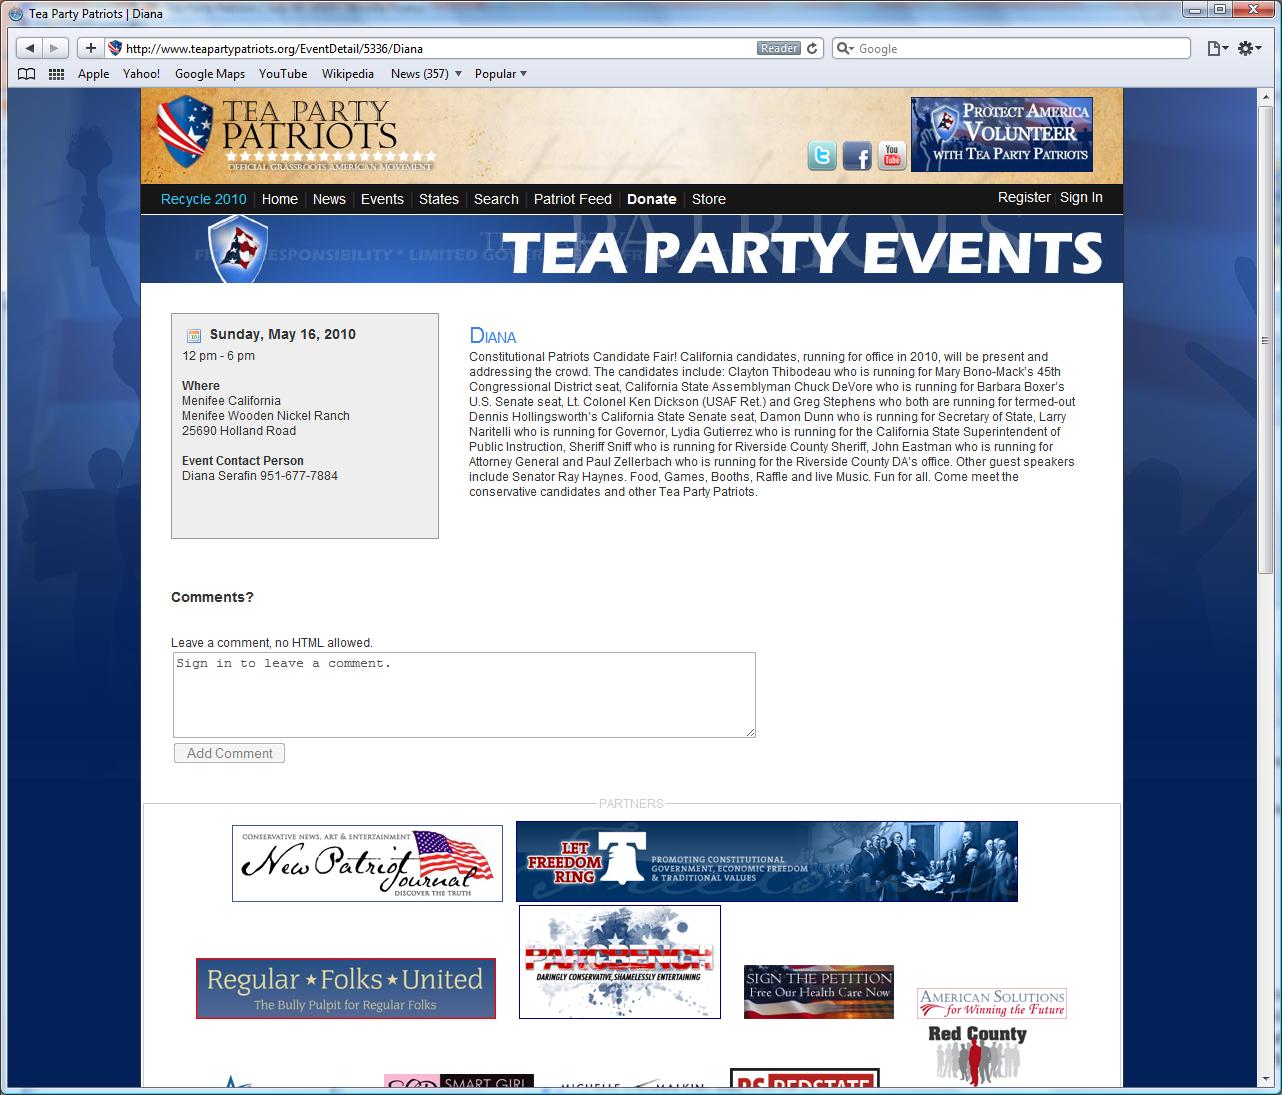 Tea Party Patriot Web Site List Diana Serafin's Telephone Number - the Same One on the Tea Party Patriot Web Site for the Temecula Mosque Protest (Screen Shot: Tea Party Patriots)